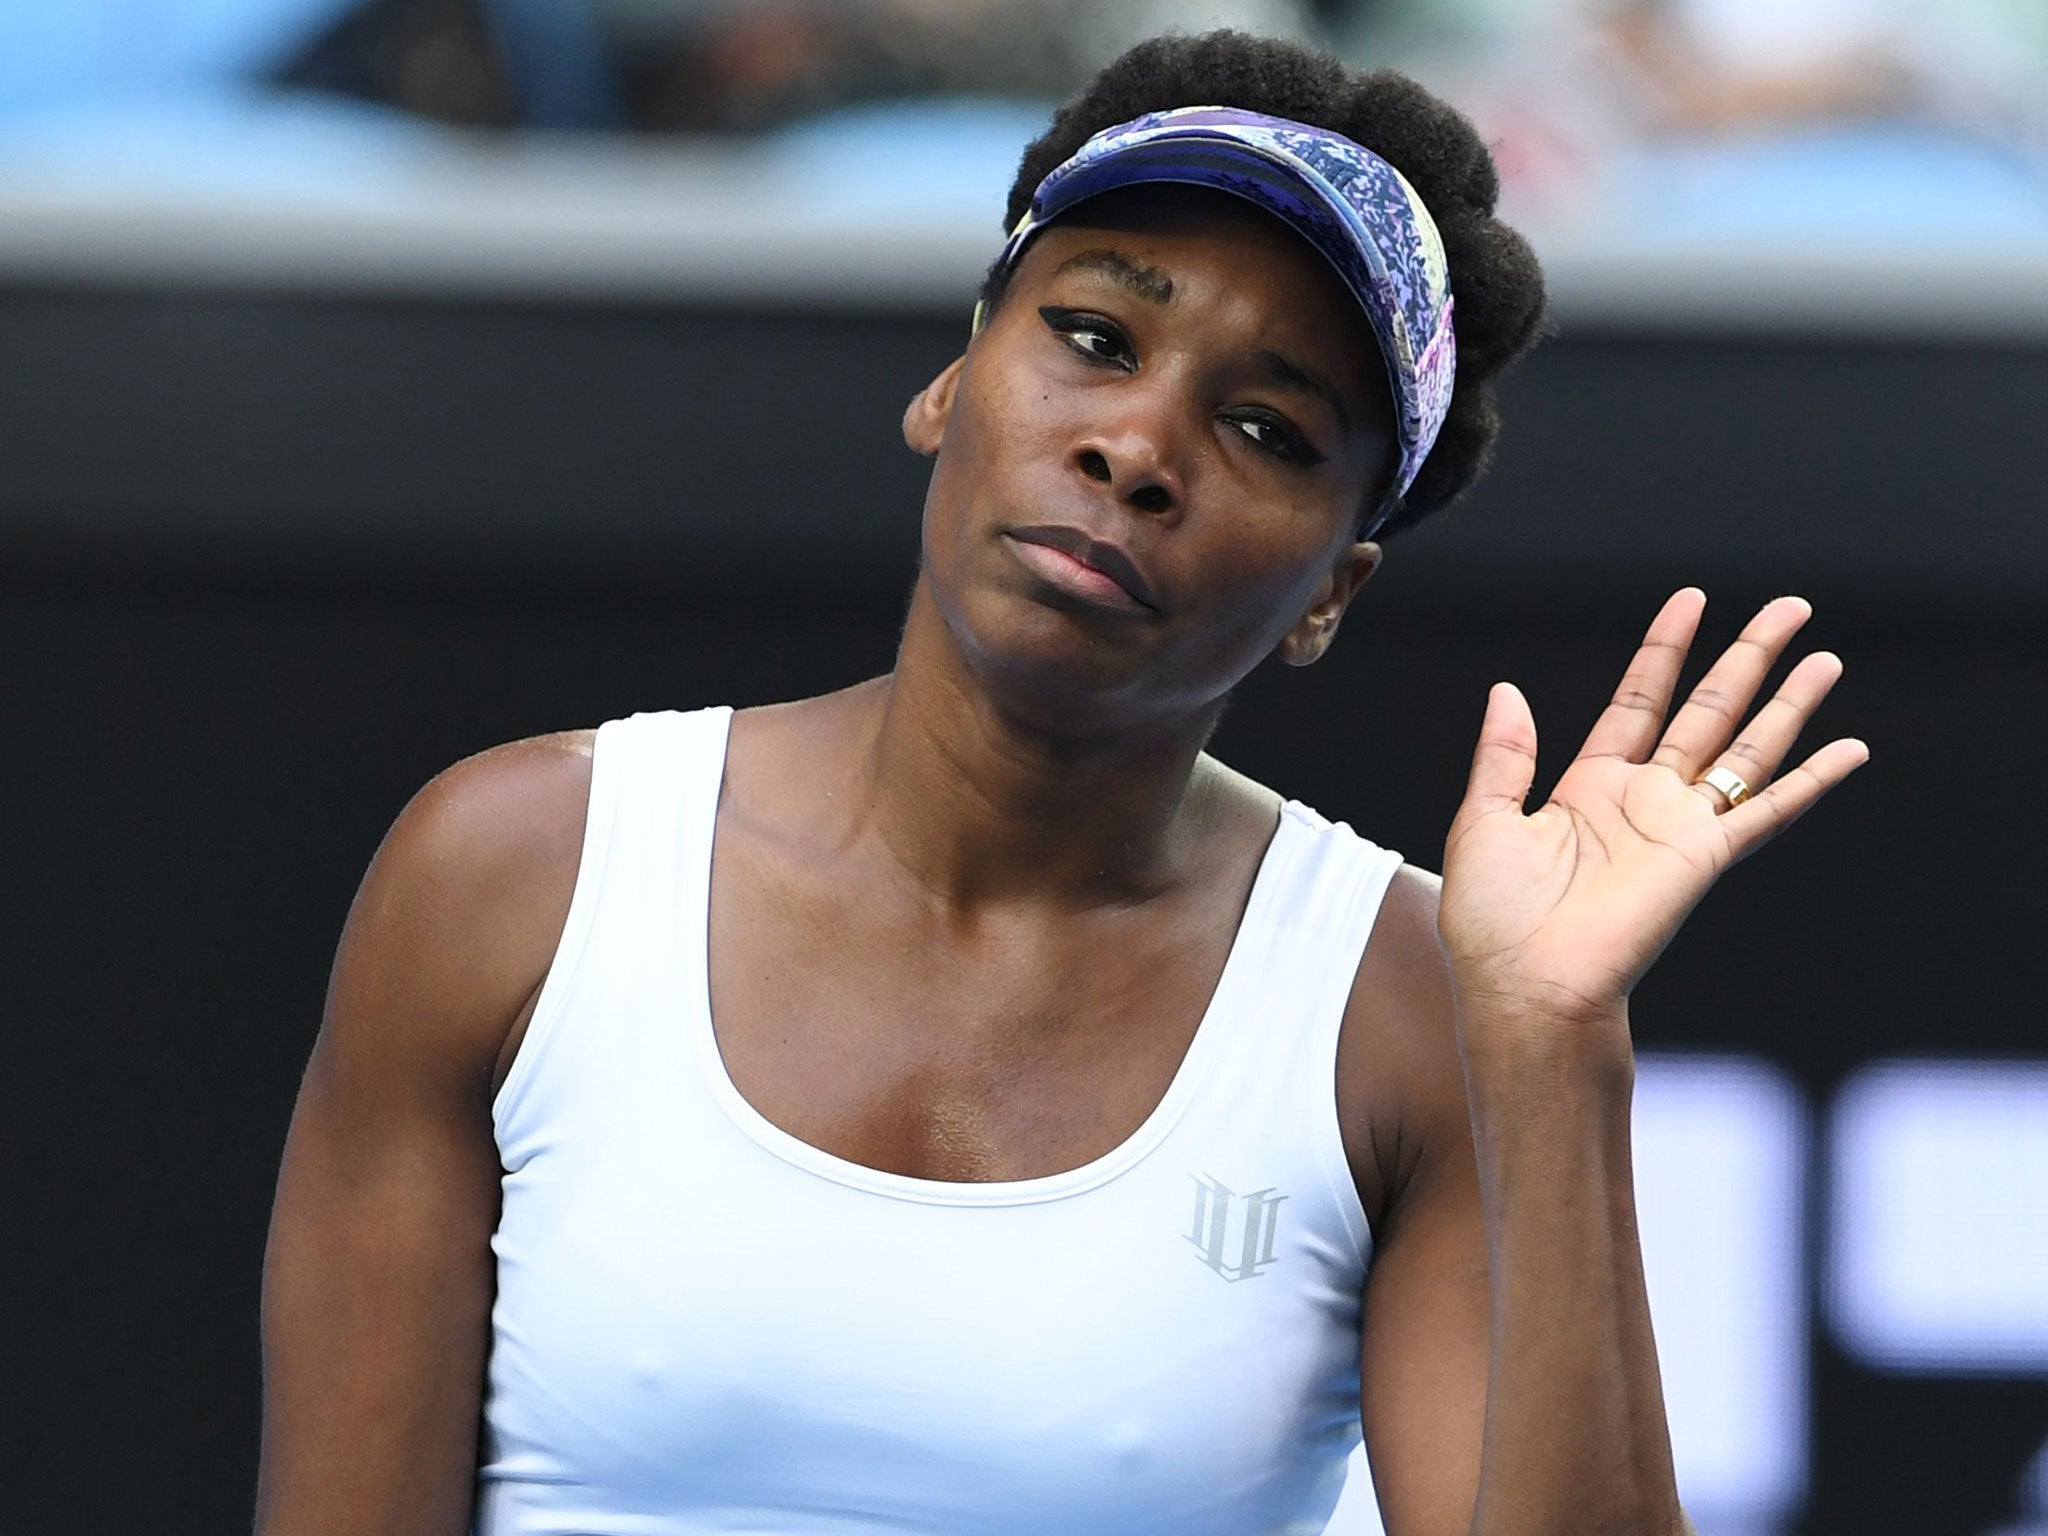 Tennis commentator Doug Adler axed from ESPNs Australian Open coverage after Venus Williams gorilla comment The Independent The Independent